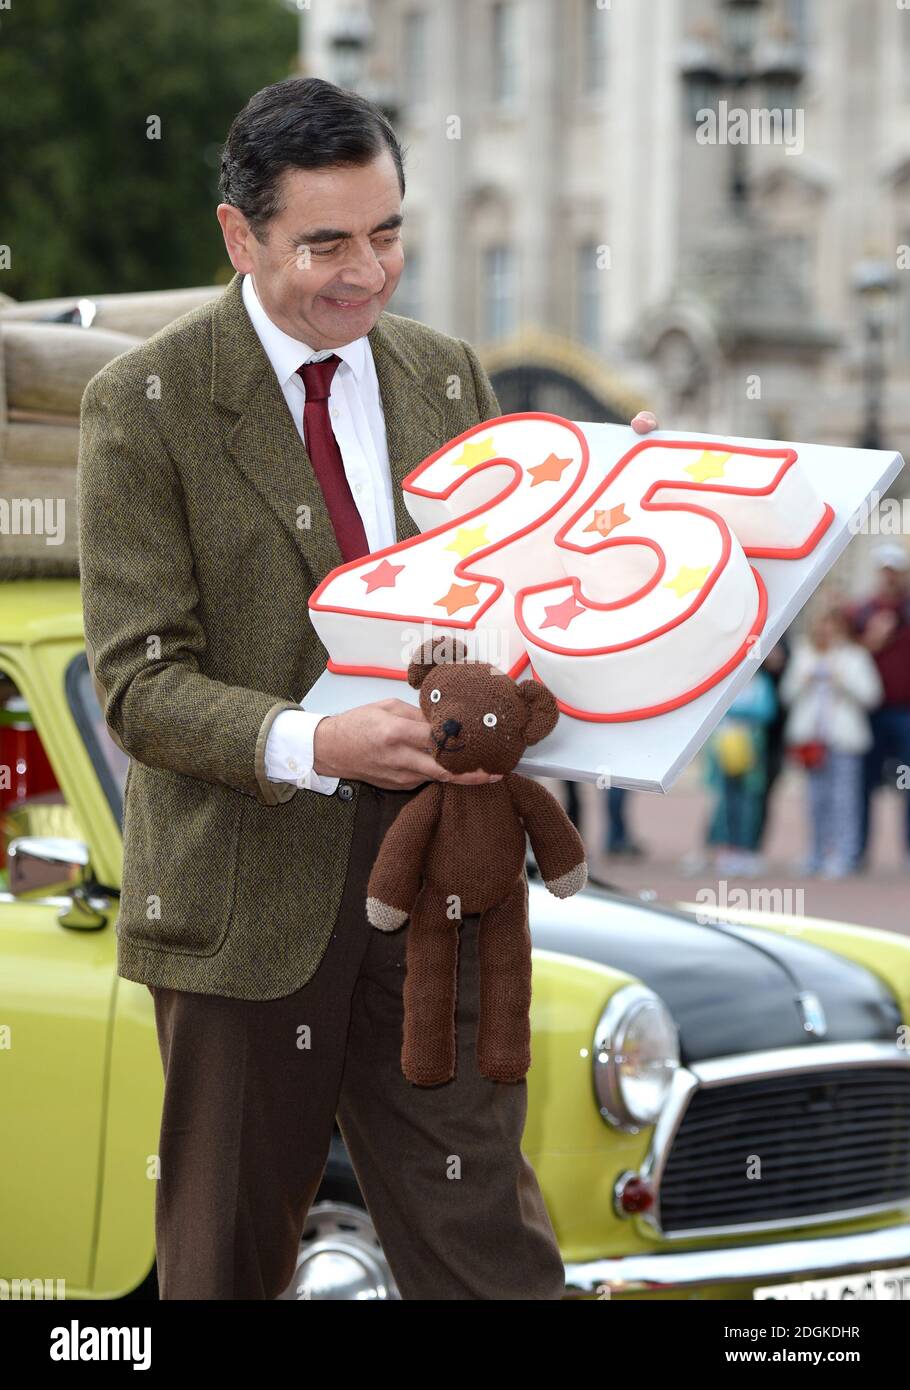 Rowan Atkinson as Mr Bean at Buckingham Palace to launch the new Mr Bean DVD and to celebrate the 25th Anniversary of the character's creation. Stock Photo